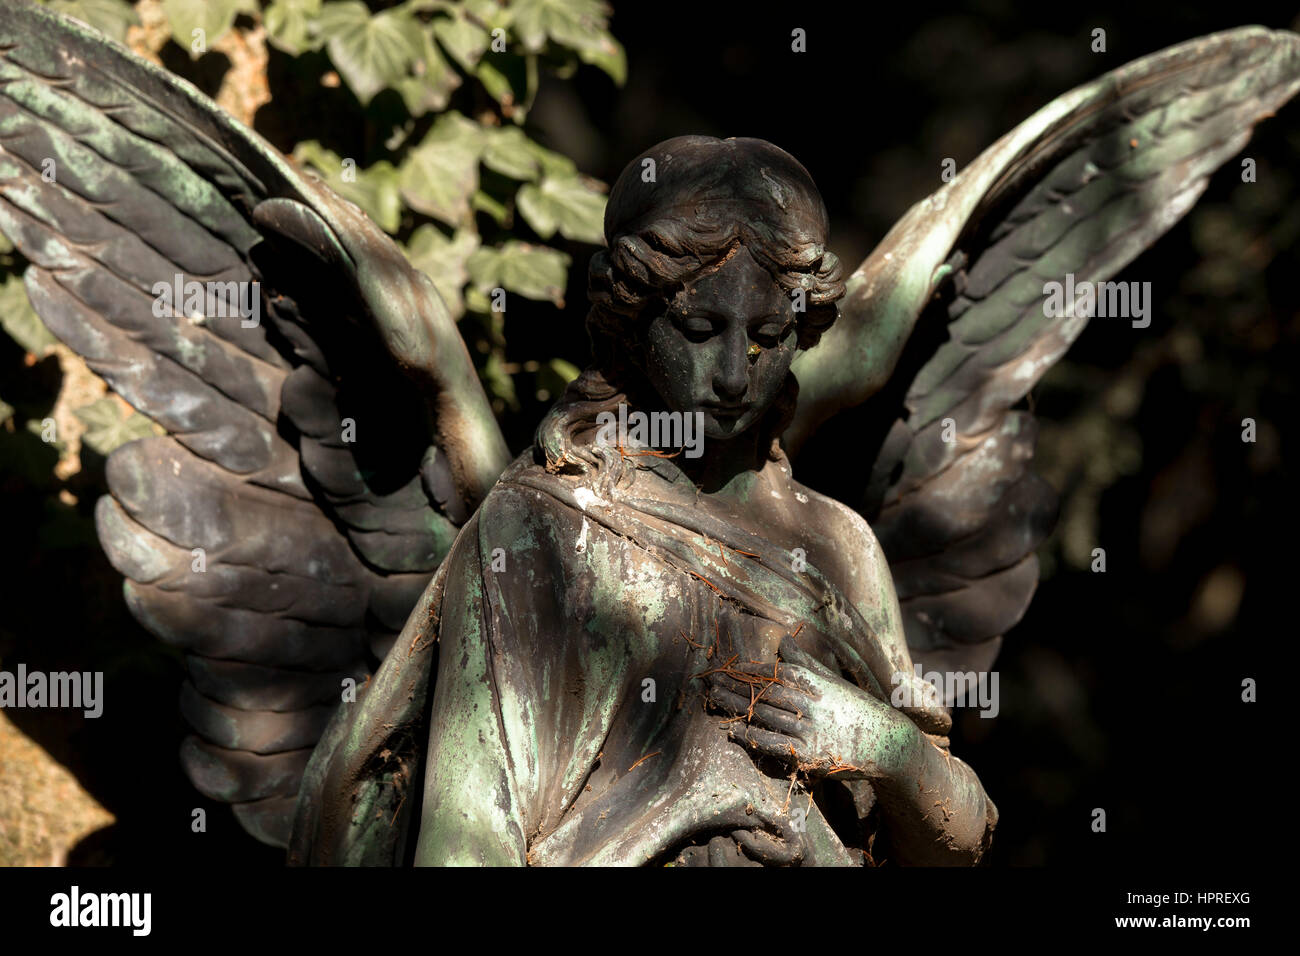 Europe, Germany, Cologne, angel at the Melaten cemetery. Stock Photo